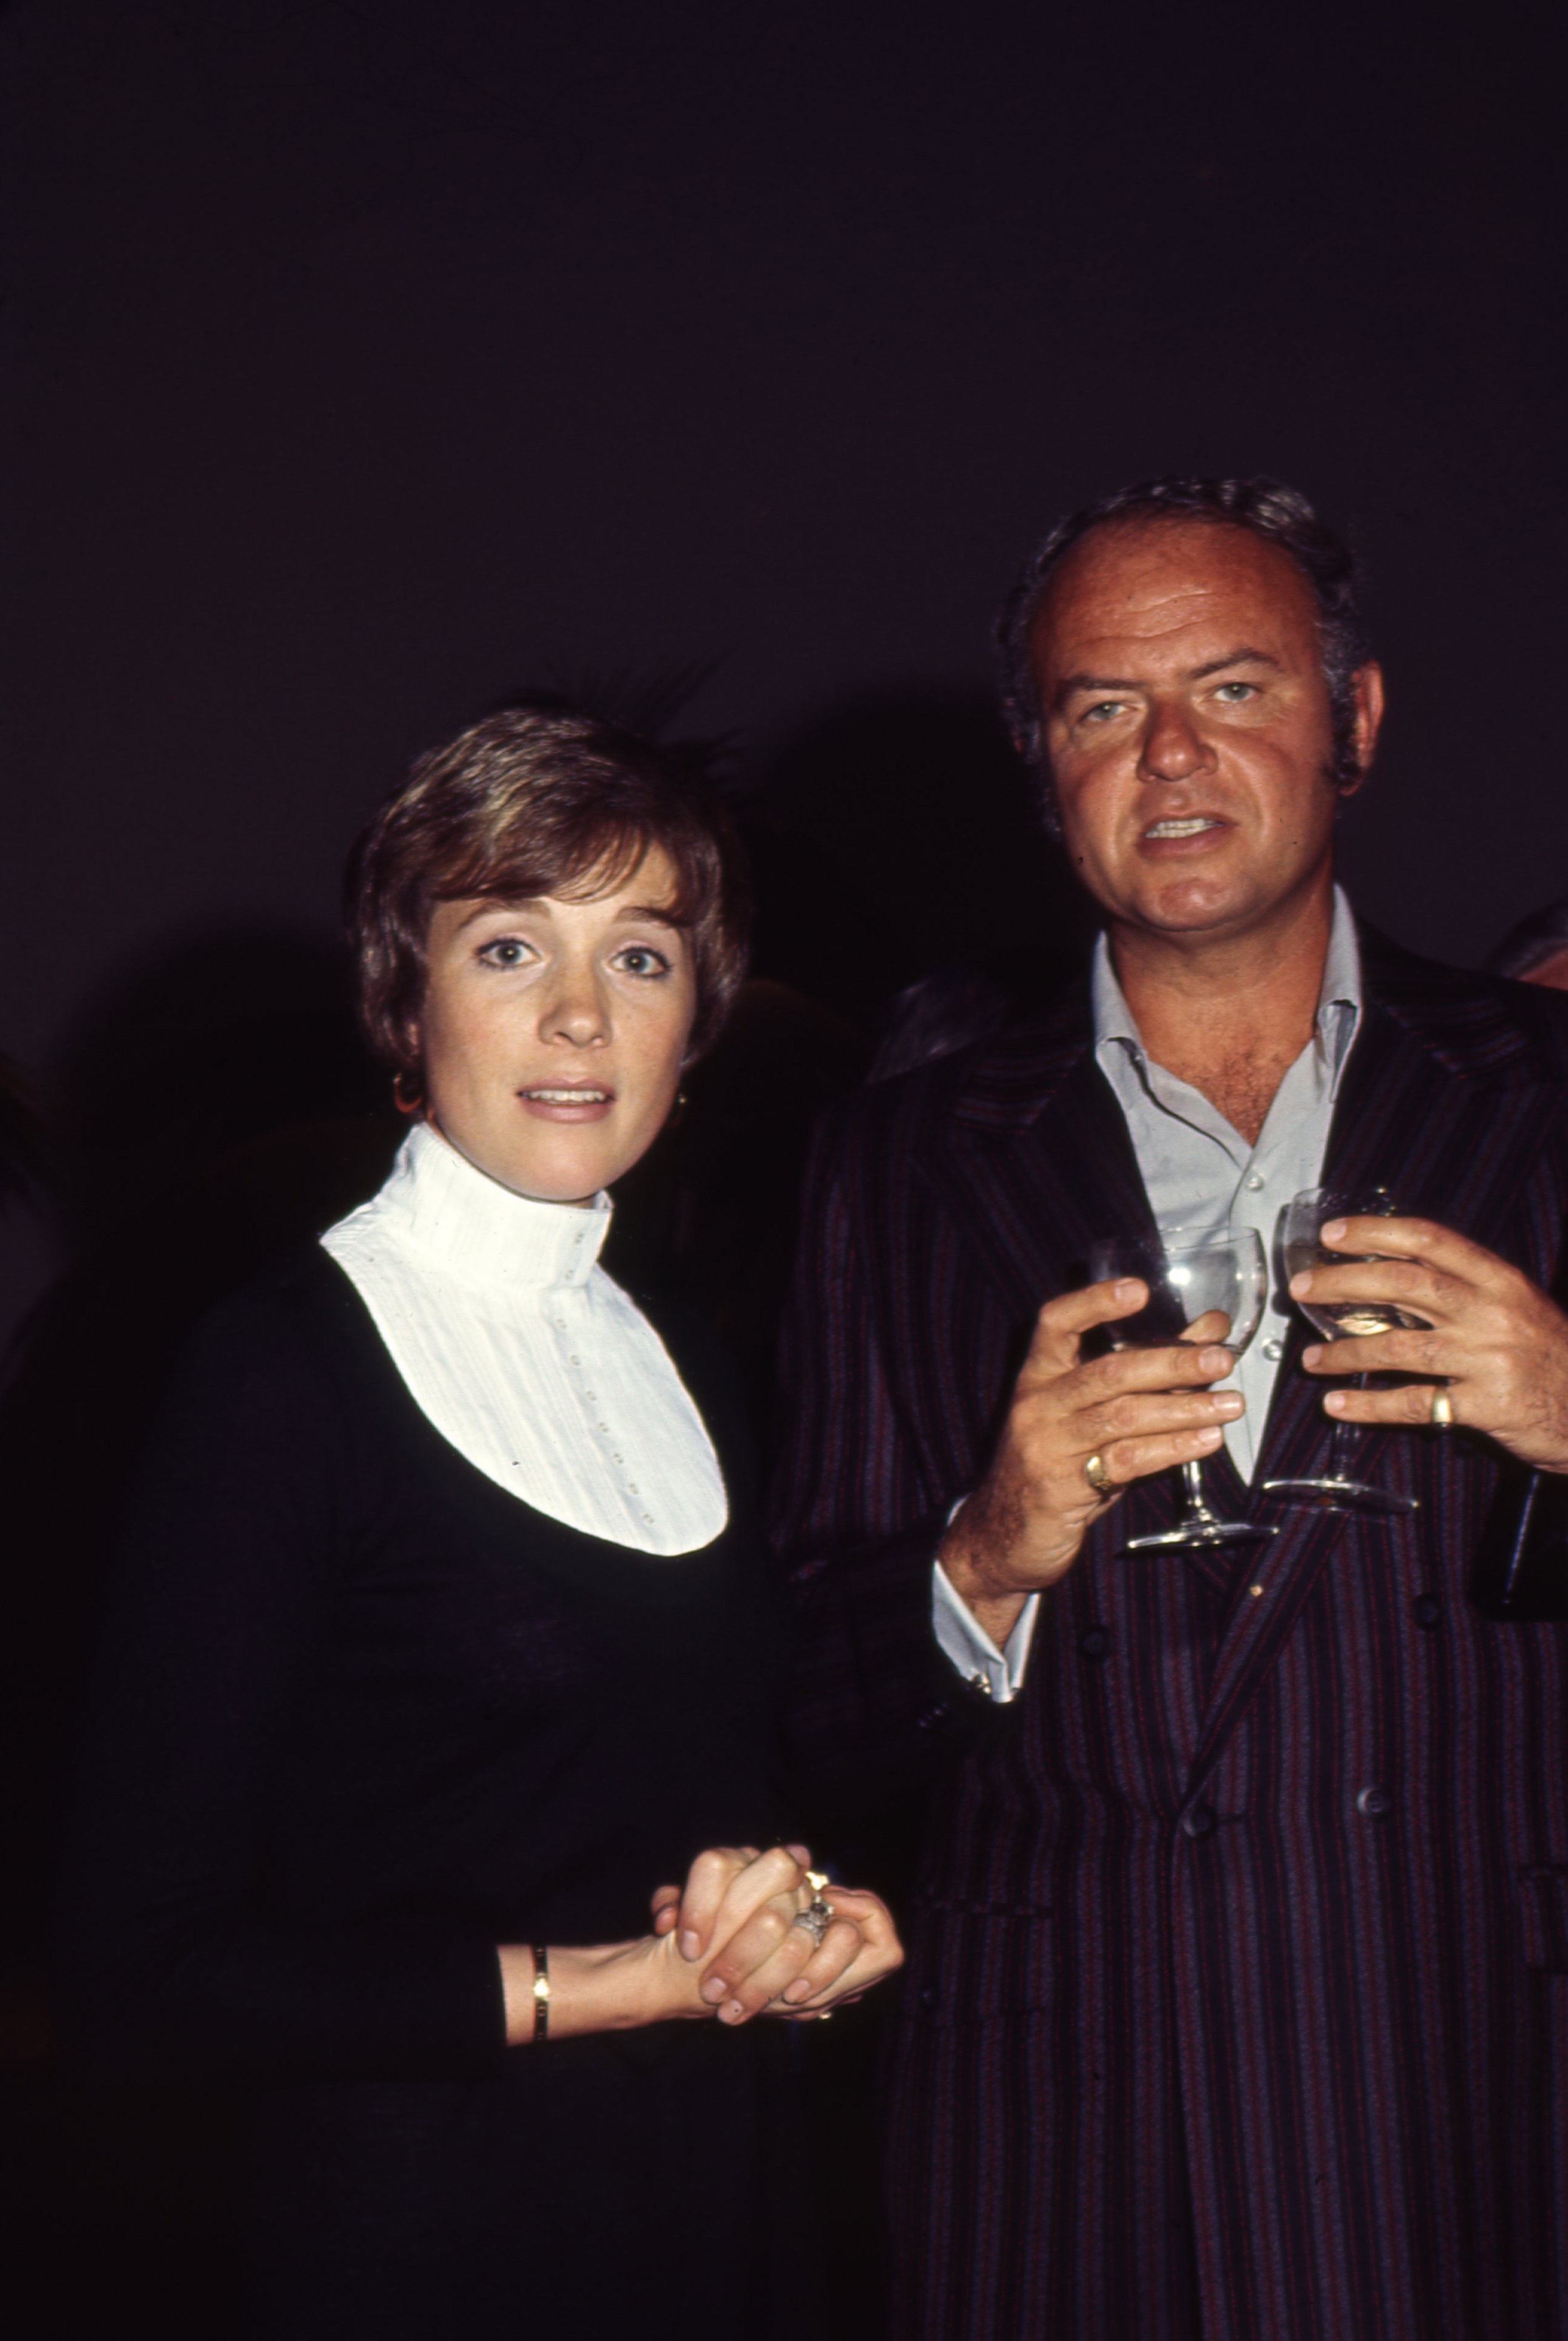 Julie in a high-neck outfit with a wide, white collar and standing with Harvey Korman